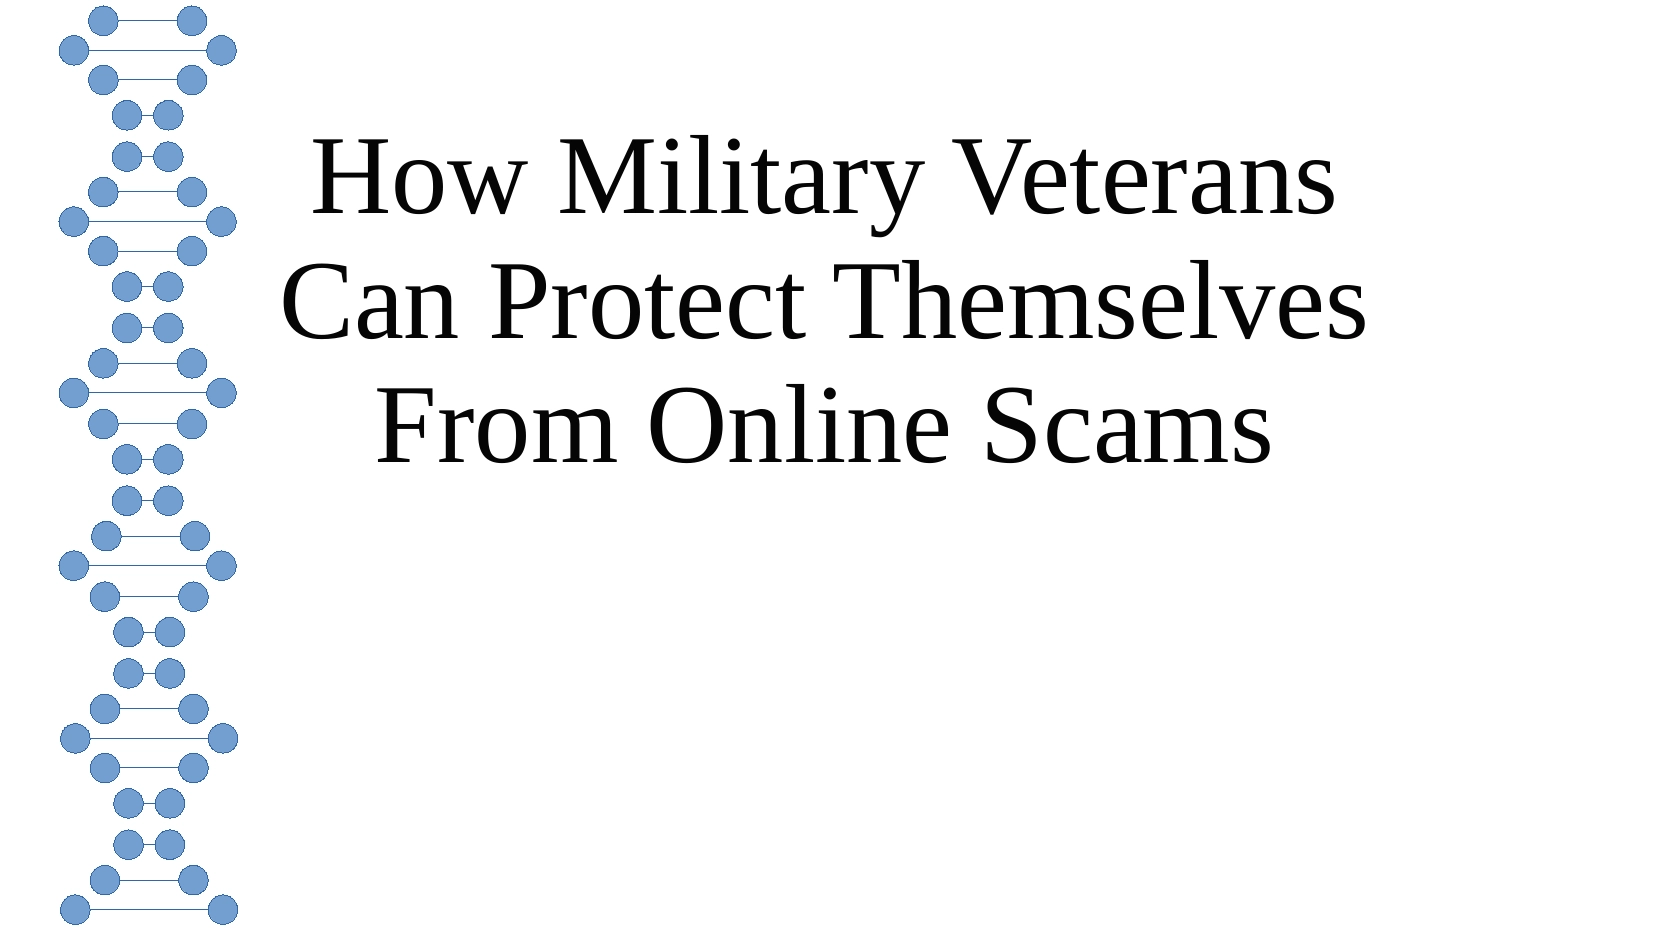 How Military Veterans Can Protect Themselves From Online Scams